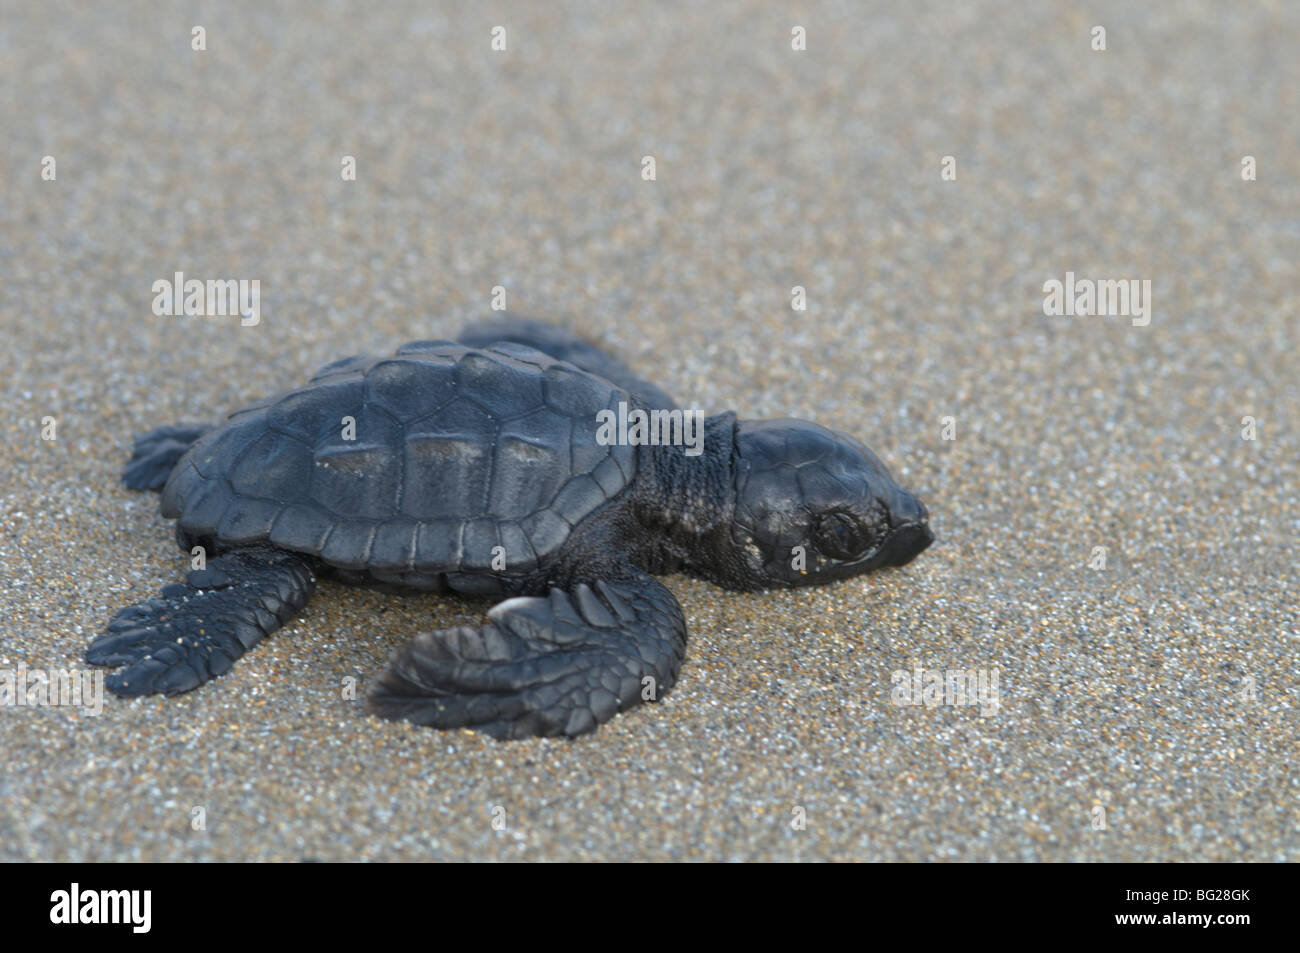 Zante. Greek island. October. Baby Loggerhead turtle (Caretta caretta) just hatched out from nest making its way to sea Stock Photo